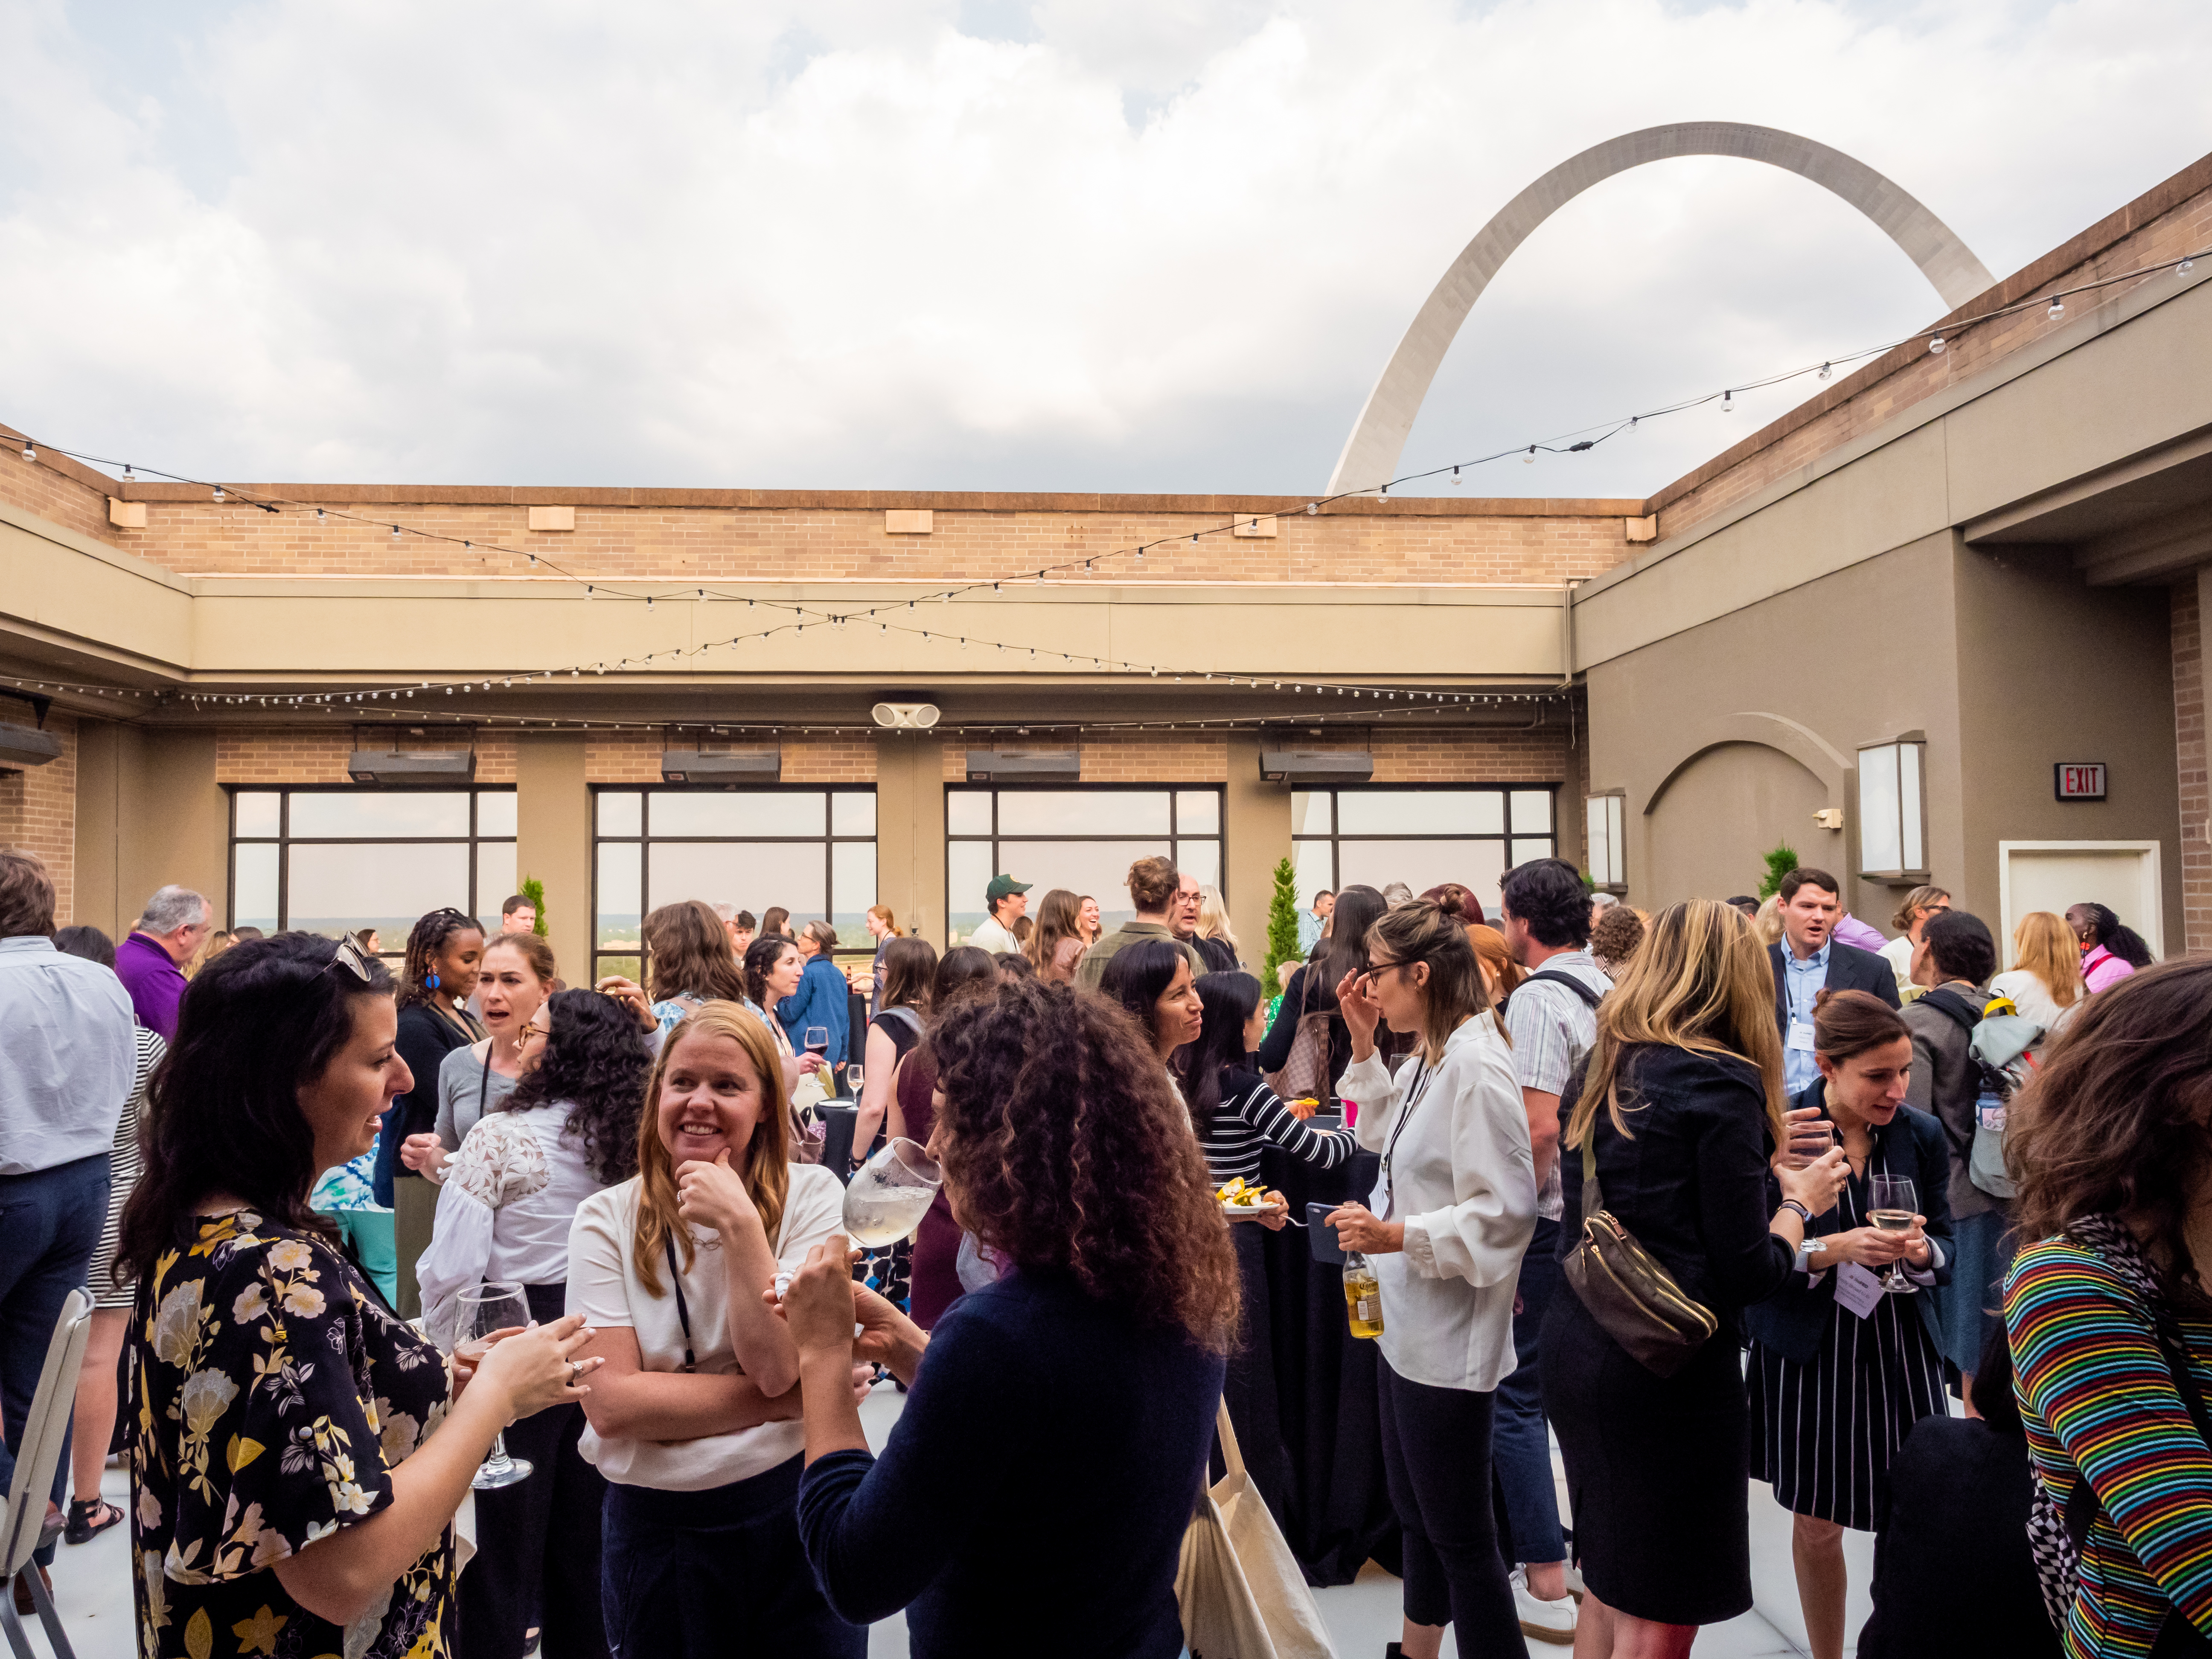 A group of people are standing and talking at a reception in an outdoor hotel space with the St. Louis Gateway Arch in the background.